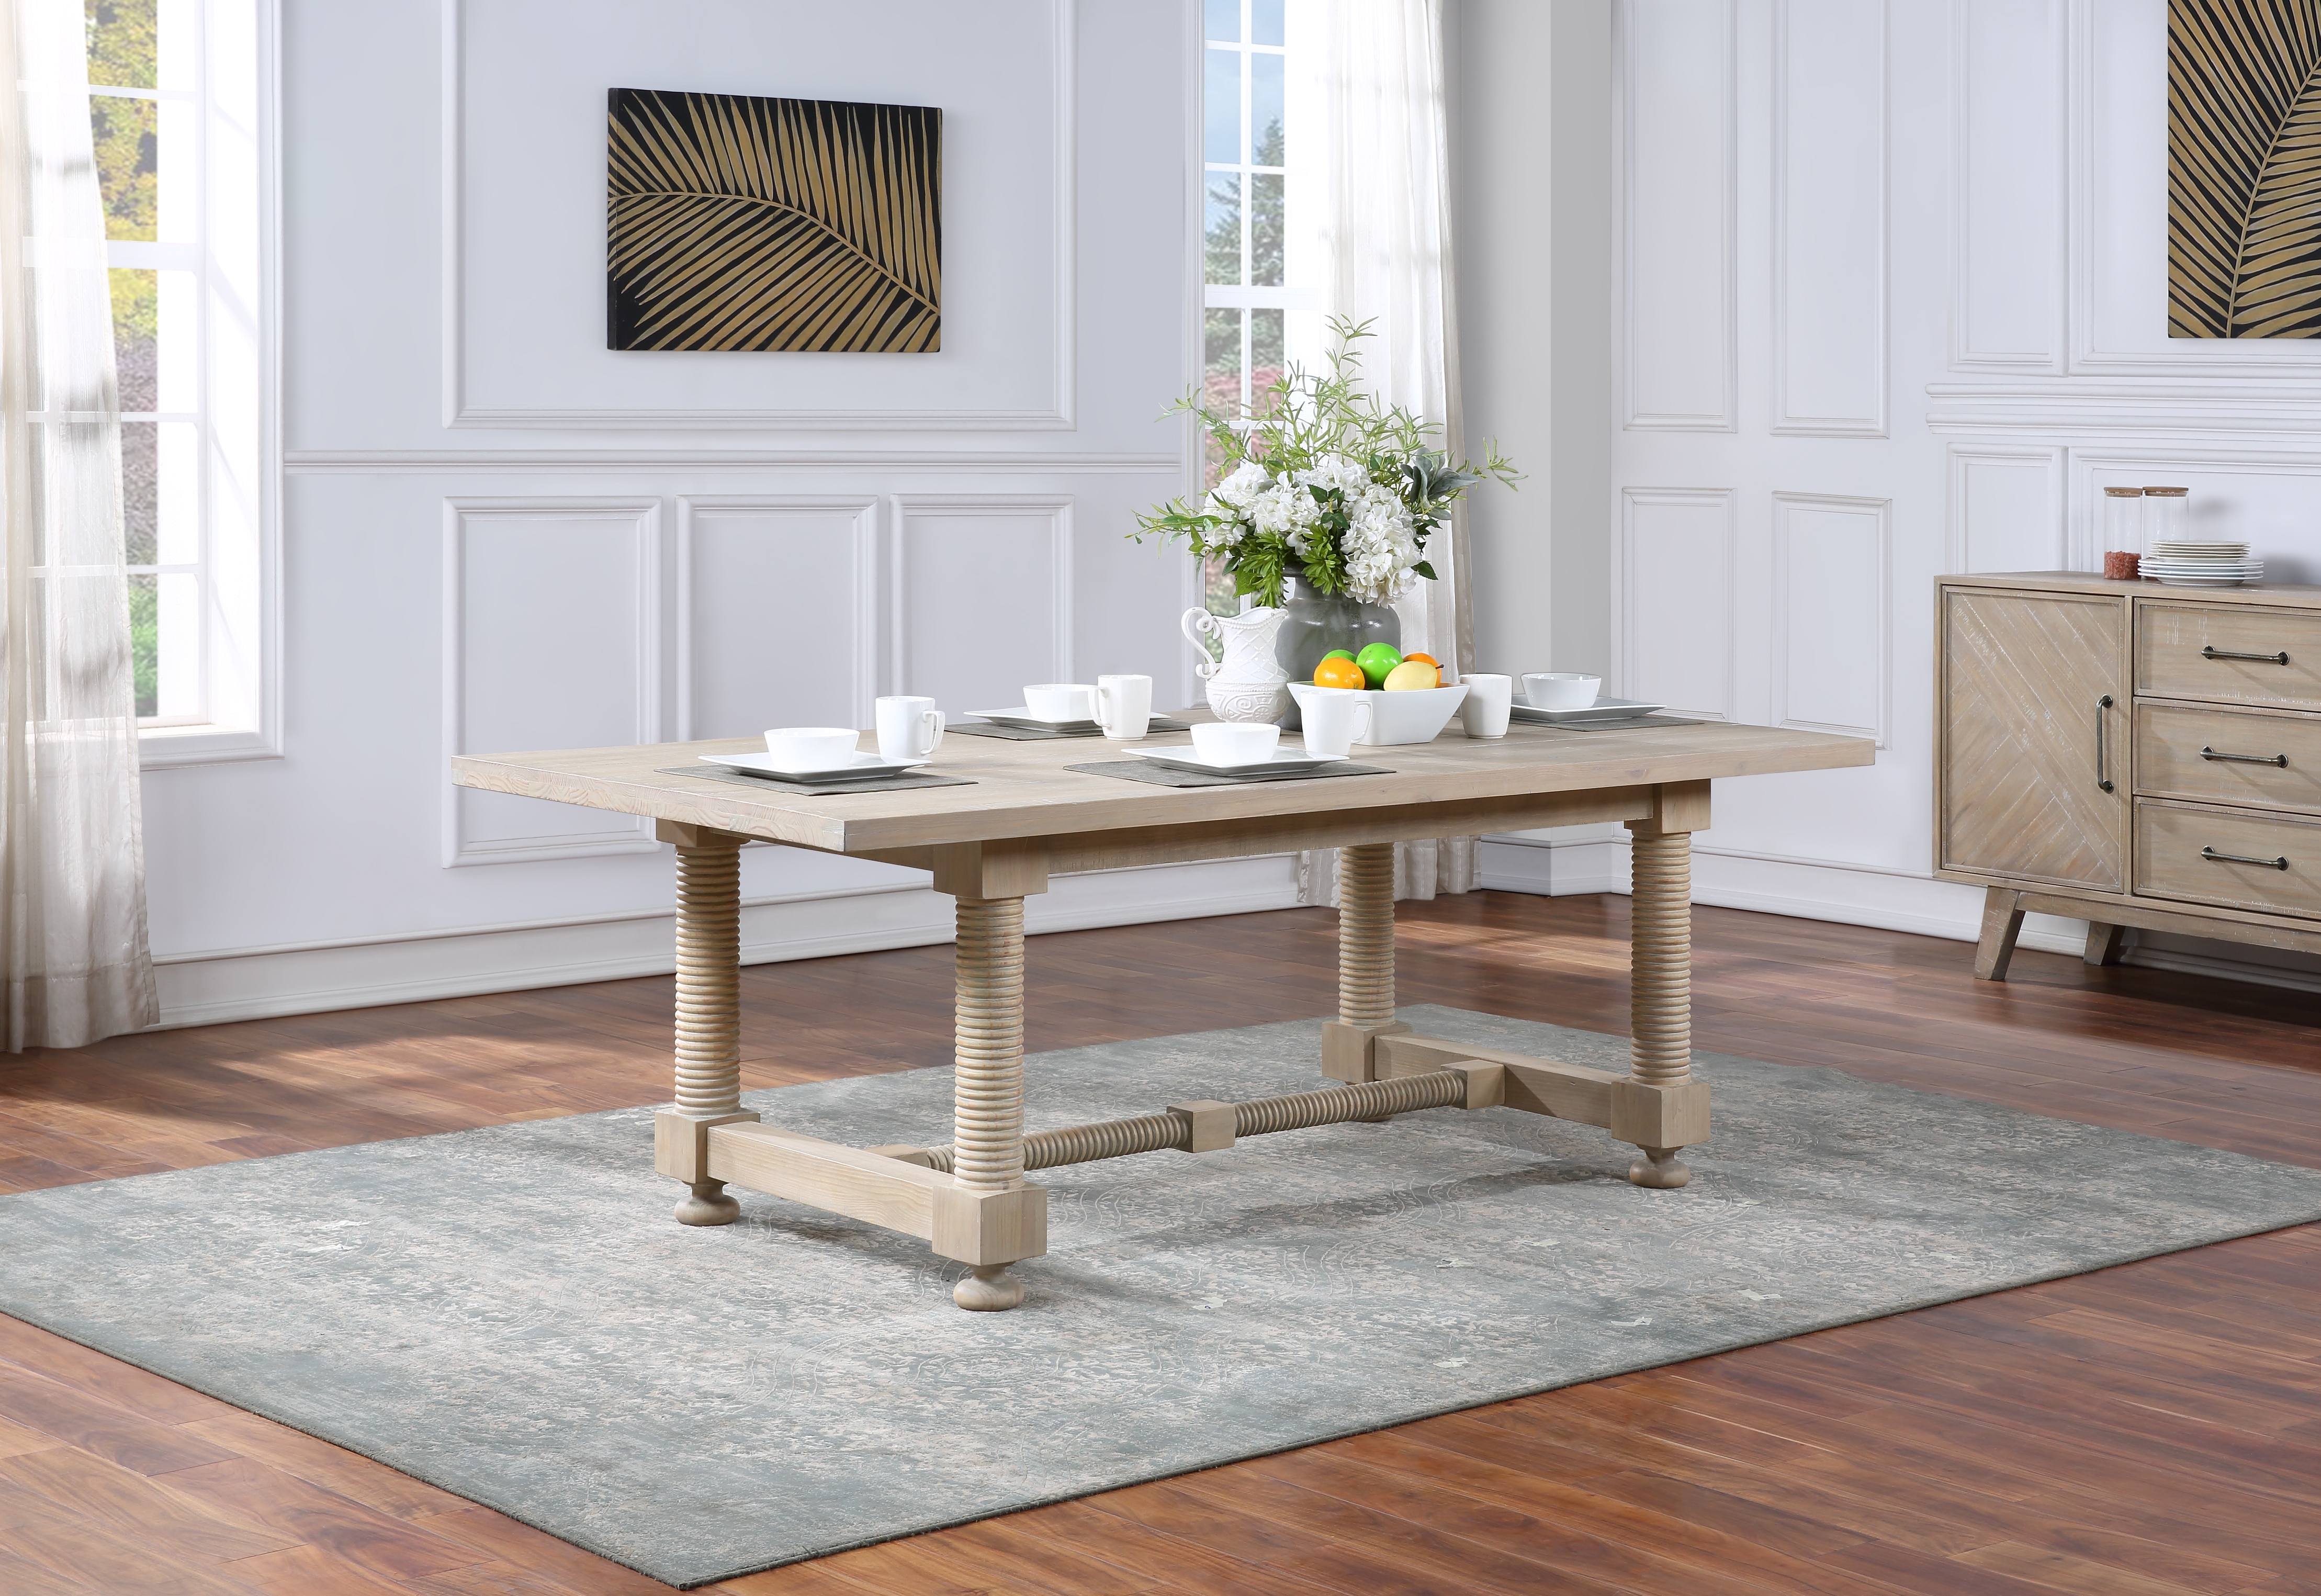 Barrister Rectangular Dining Table - 2 Cartons - Barrister Distressed - Image 2